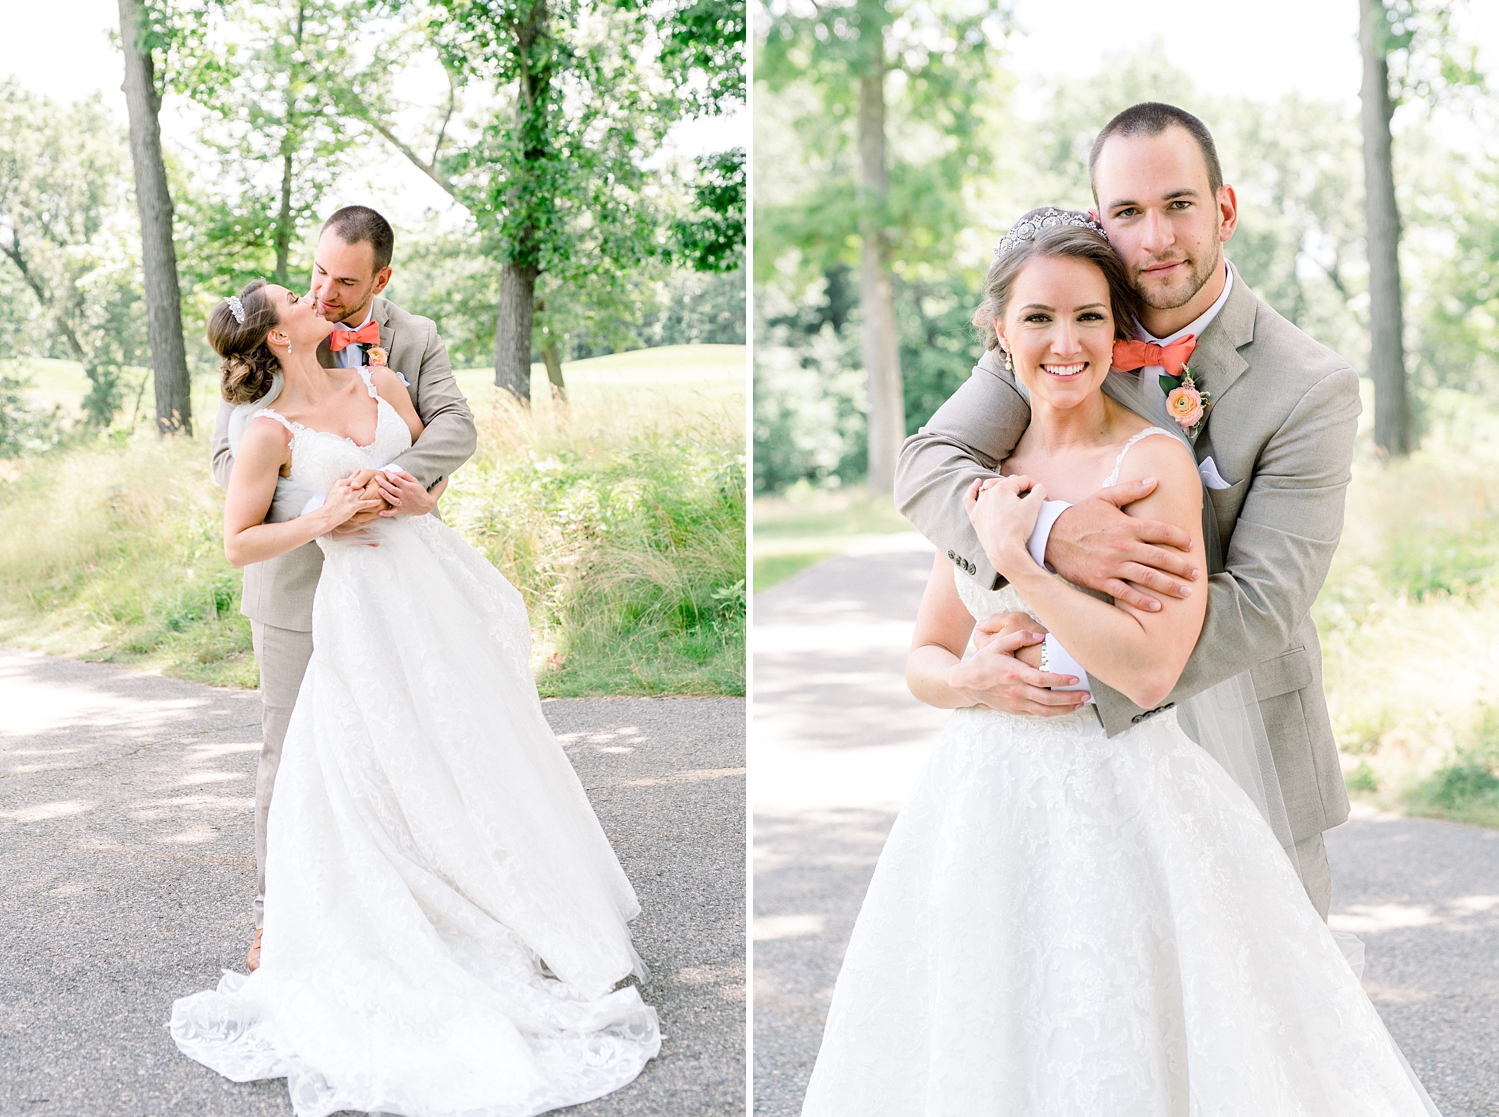 Romantic Garden Themed, Peach and Coral Summertime Wedding by Erika Christine Photography. 